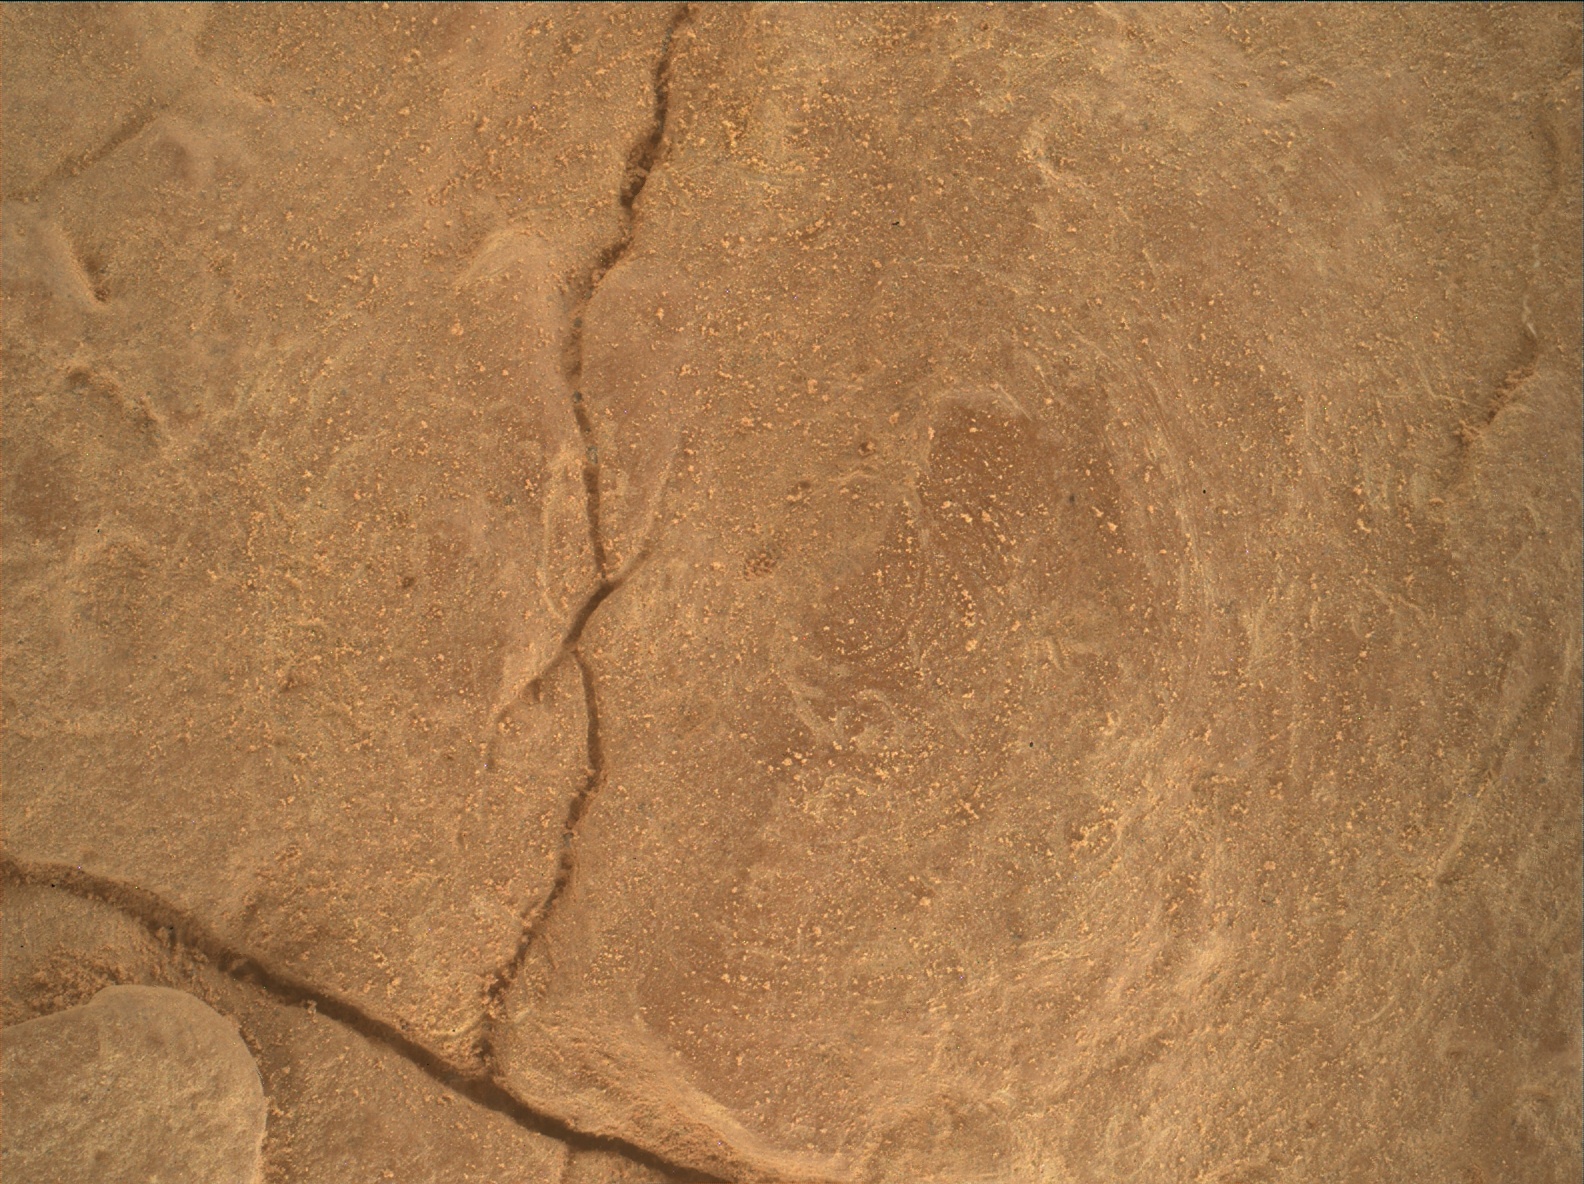 Nasa's Mars rover Curiosity acquired this image using its Mars Hand Lens Imager (MAHLI) on Sol 2416